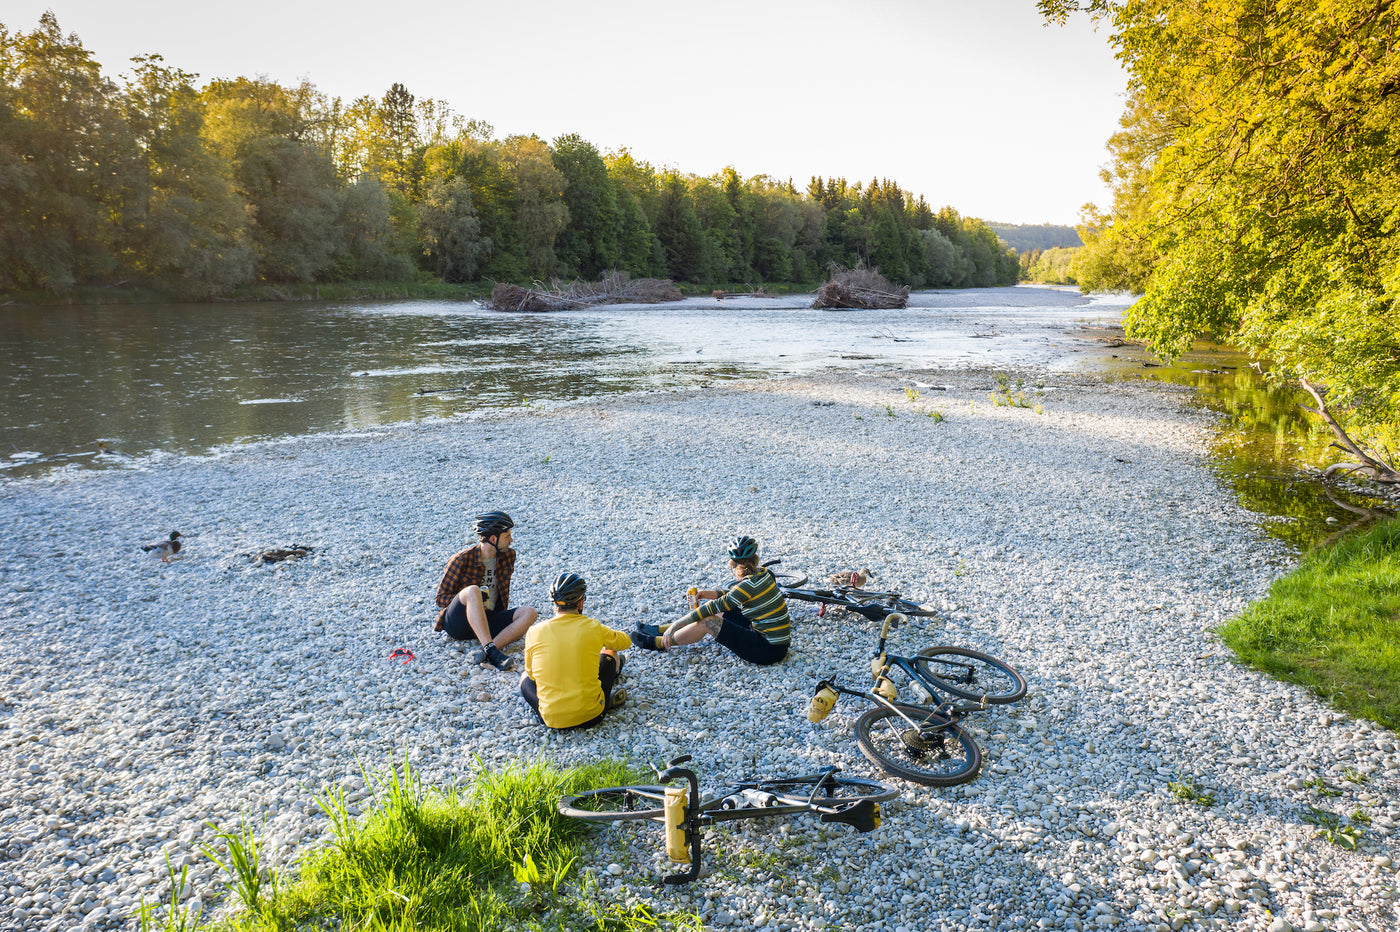 EVOC gravel bike riders with bike packing bags sitting next to Isar River in Germany